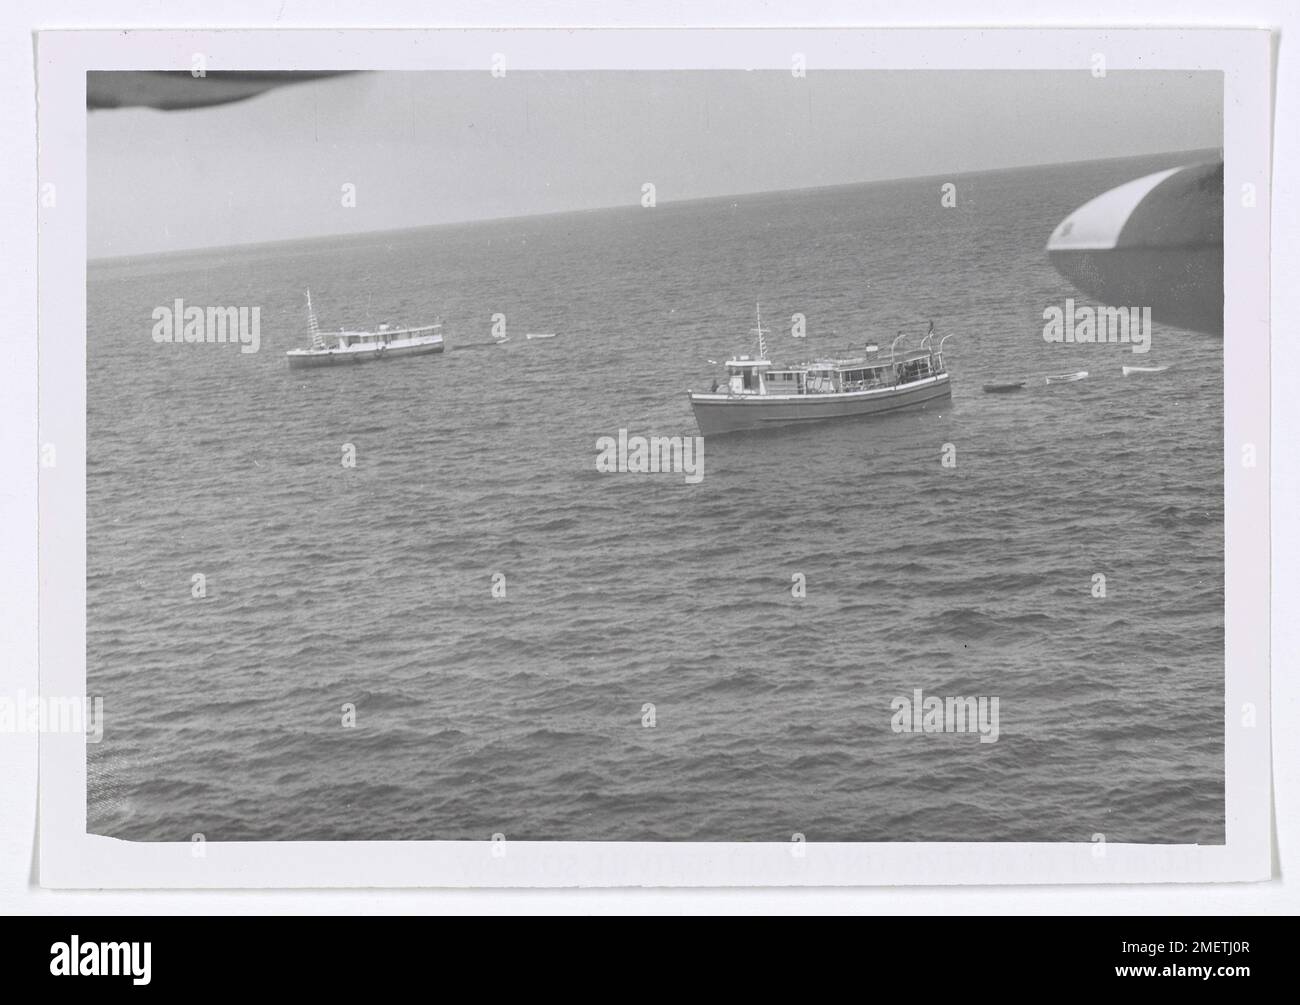 Photograph of Andros Trader (top) & Madam Elizabeth Near Bimini. This image is one of a set of photographs taken of the fishing vessels involved in a shooting incident 12 March near Bimini. These photos were not released as no Coast Guard action was involved and the vessels were Bahamian and Cuban. The photos were shot with a K-20 aerial camera by an air crewman, and not by one of the rated photographers assigned. Stock Photo